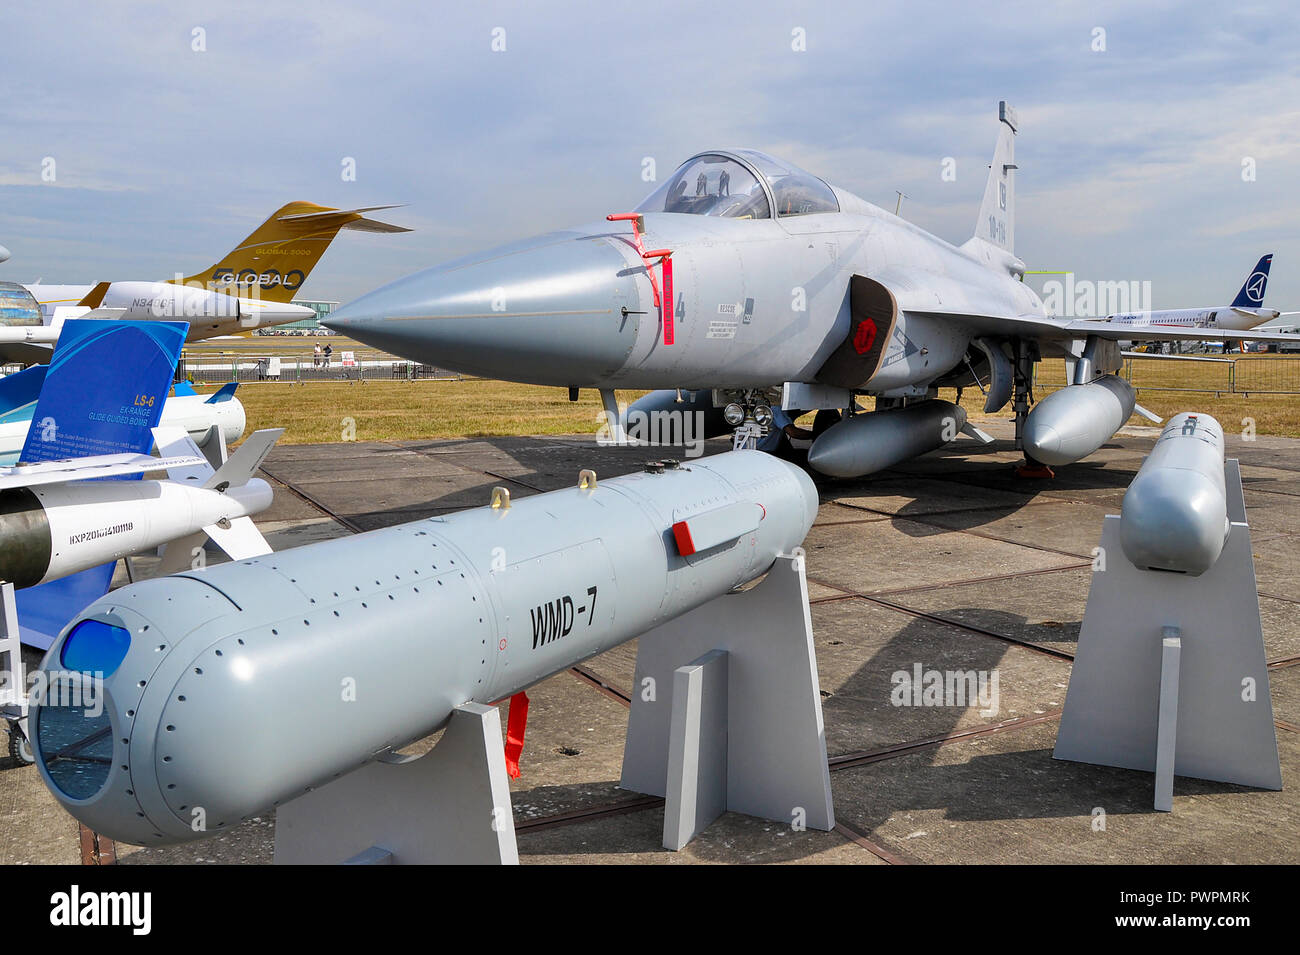 PAC JF-17 Thunder CAC FC-1 Xiaolong (Fierce Dragon) jet fighter plane by Pakistan Aeronautical Complex (PAC) and the Chengdu Aircraft Corporation Stock Photo